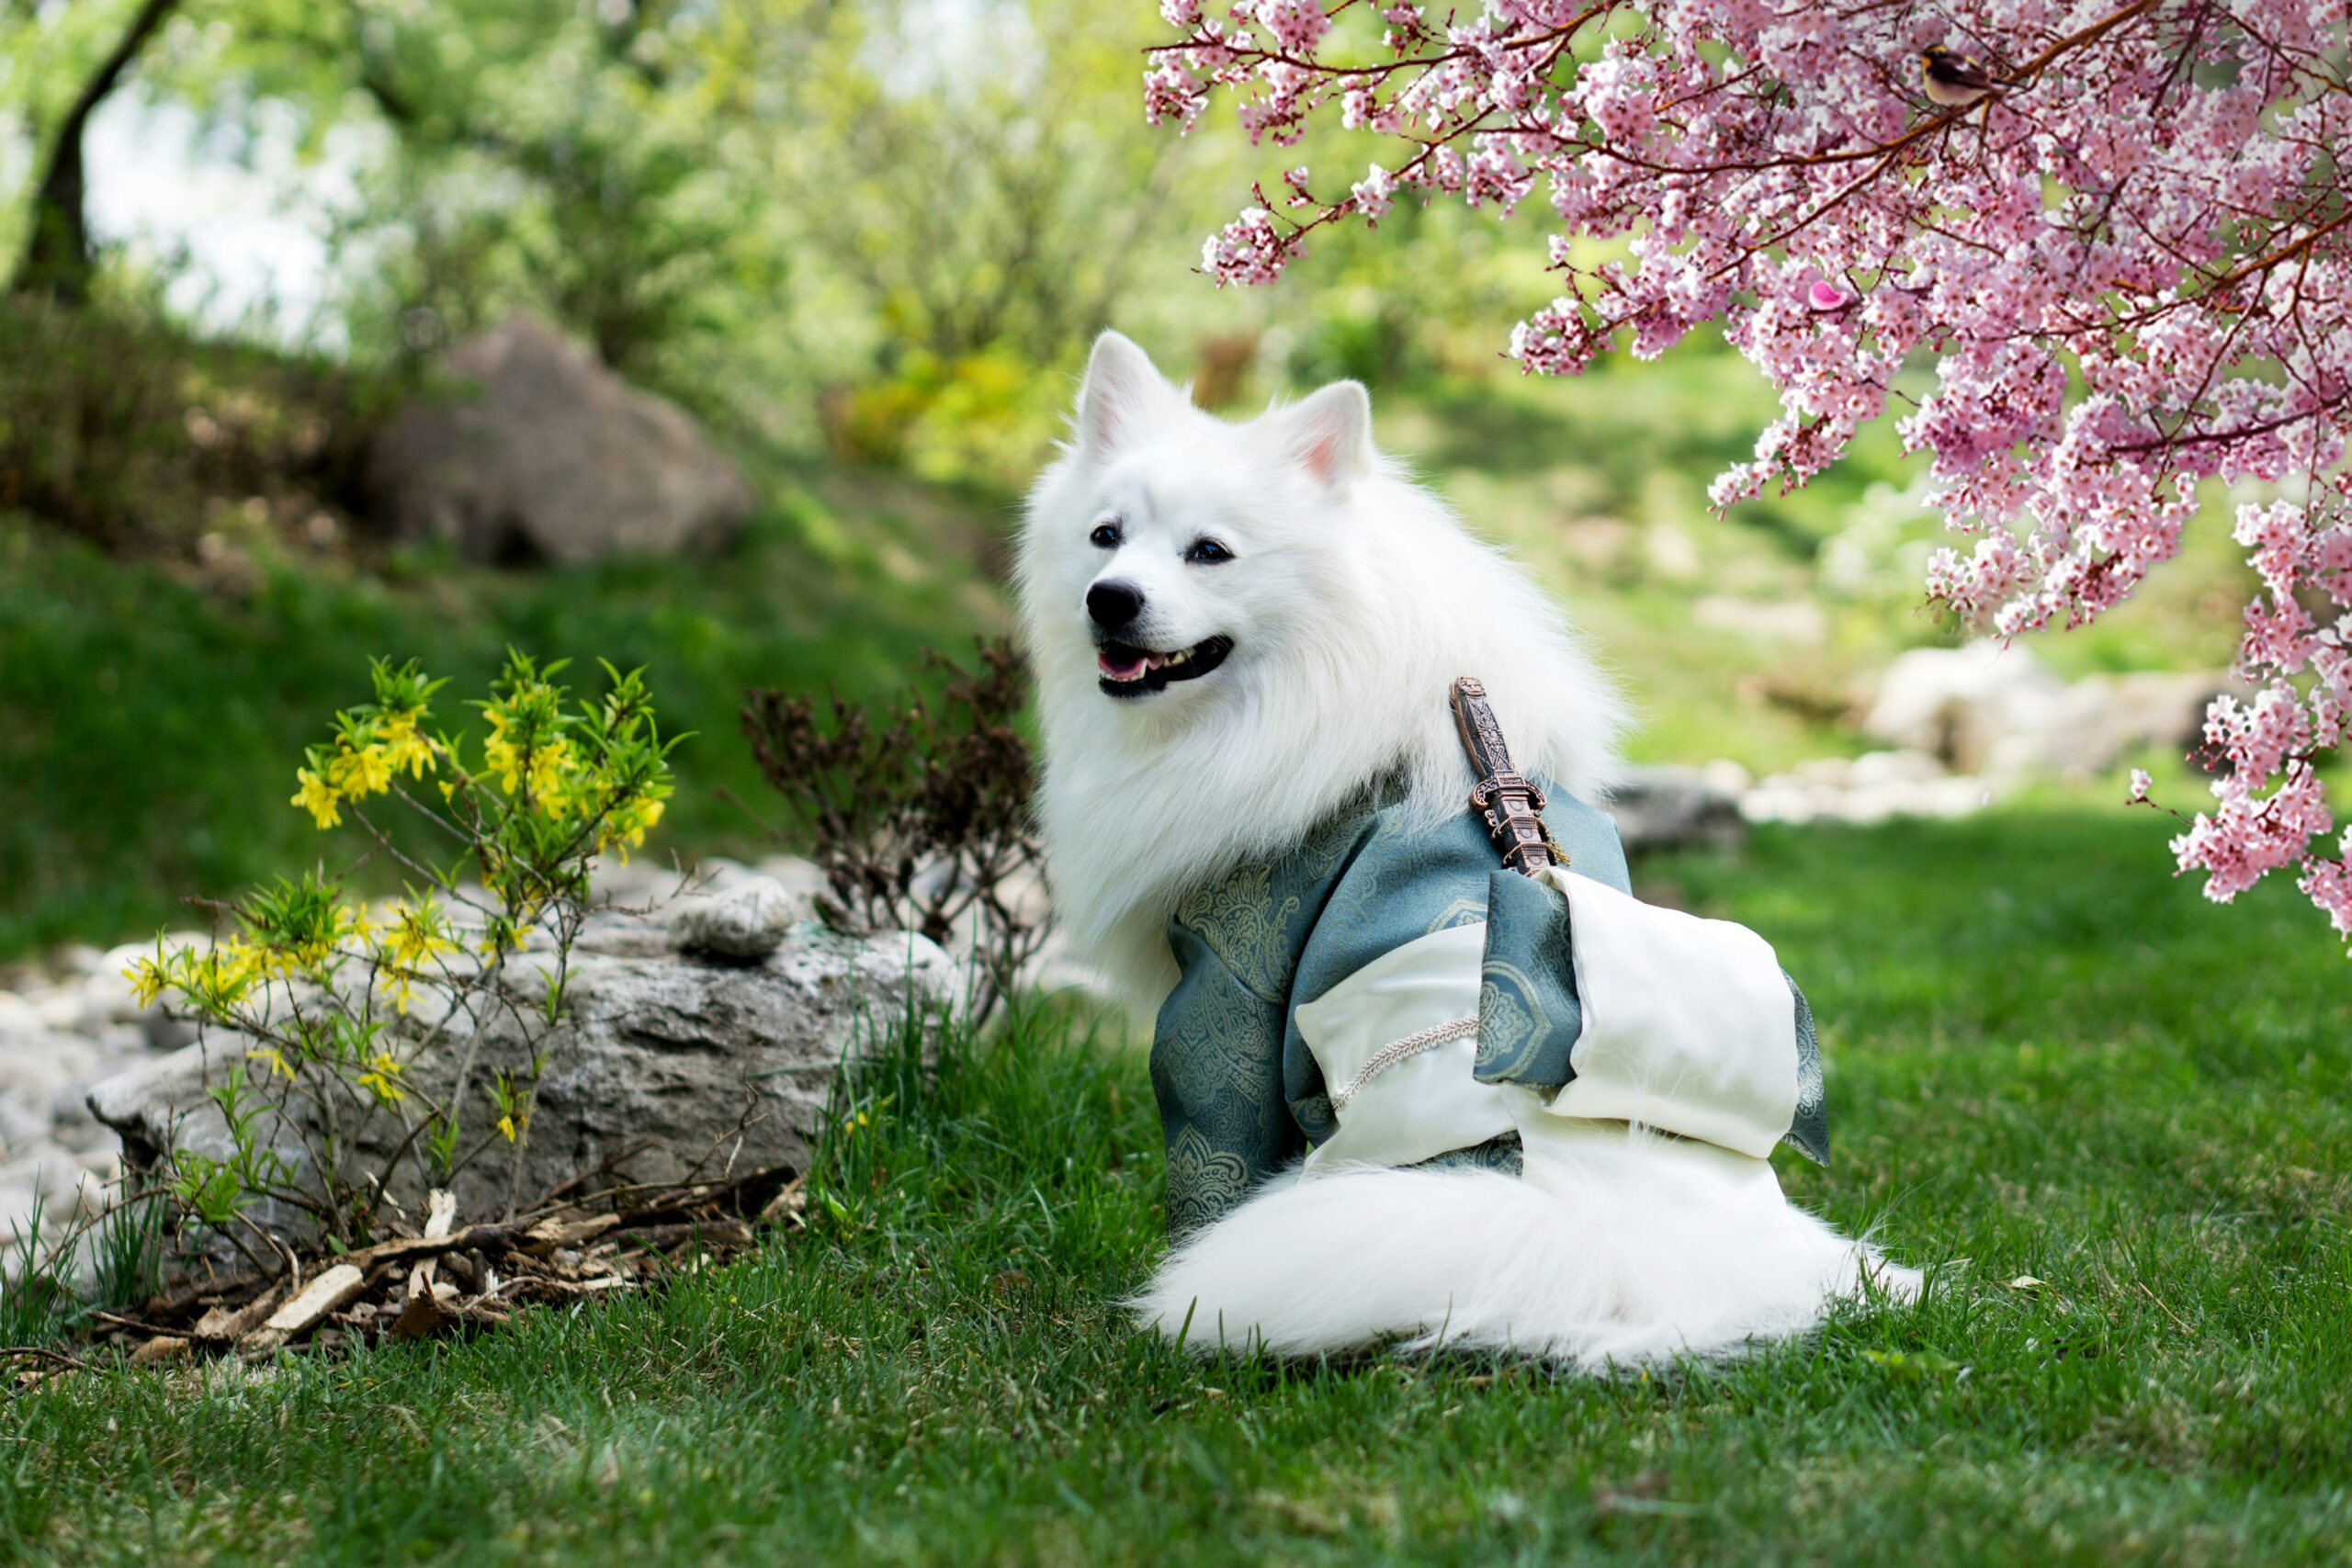 A sweet white fluffily dog dressed for spring